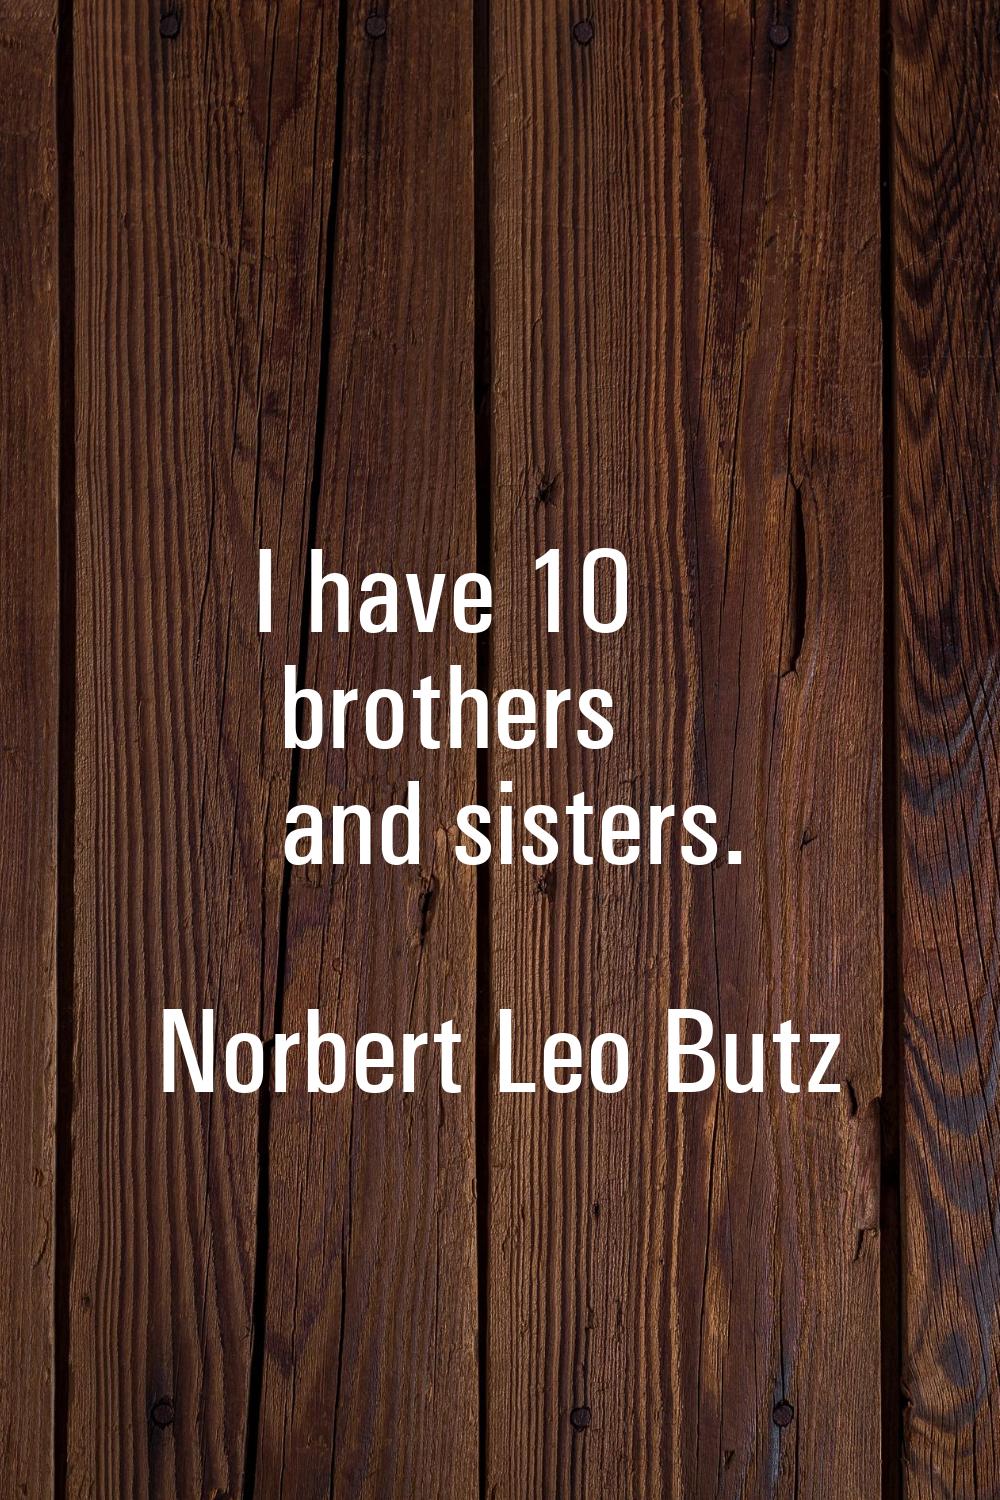 I have 10 brothers and sisters.